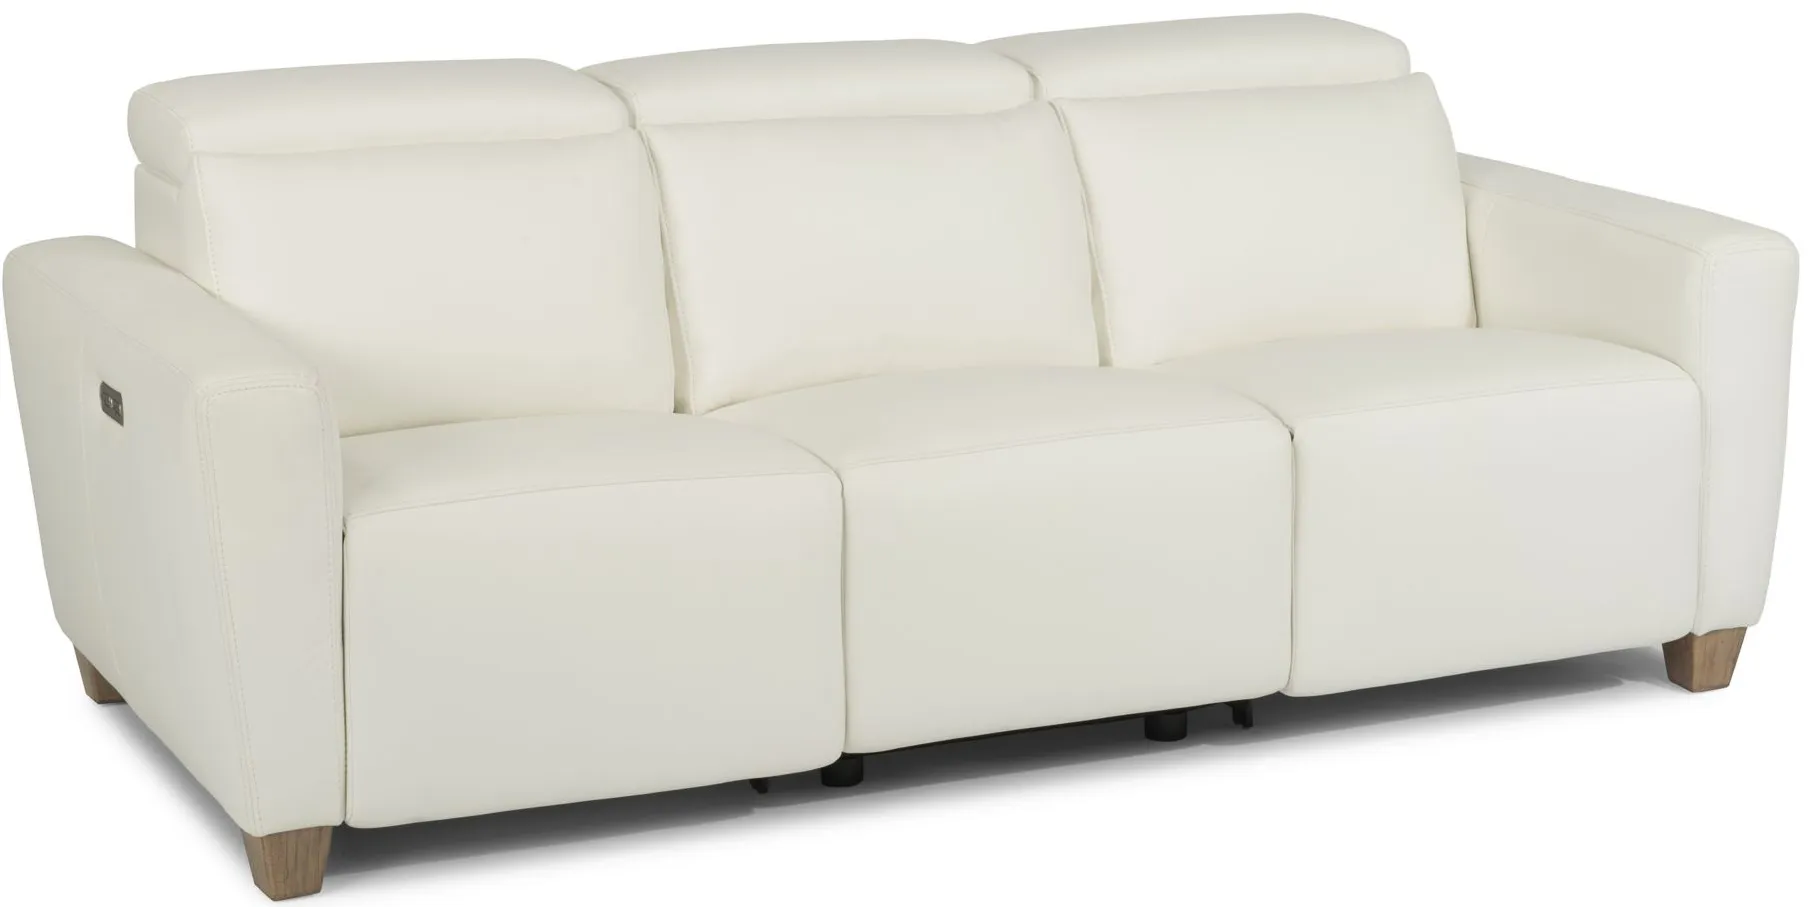 Astra 3 pc. Sofa in White by Flexsteel